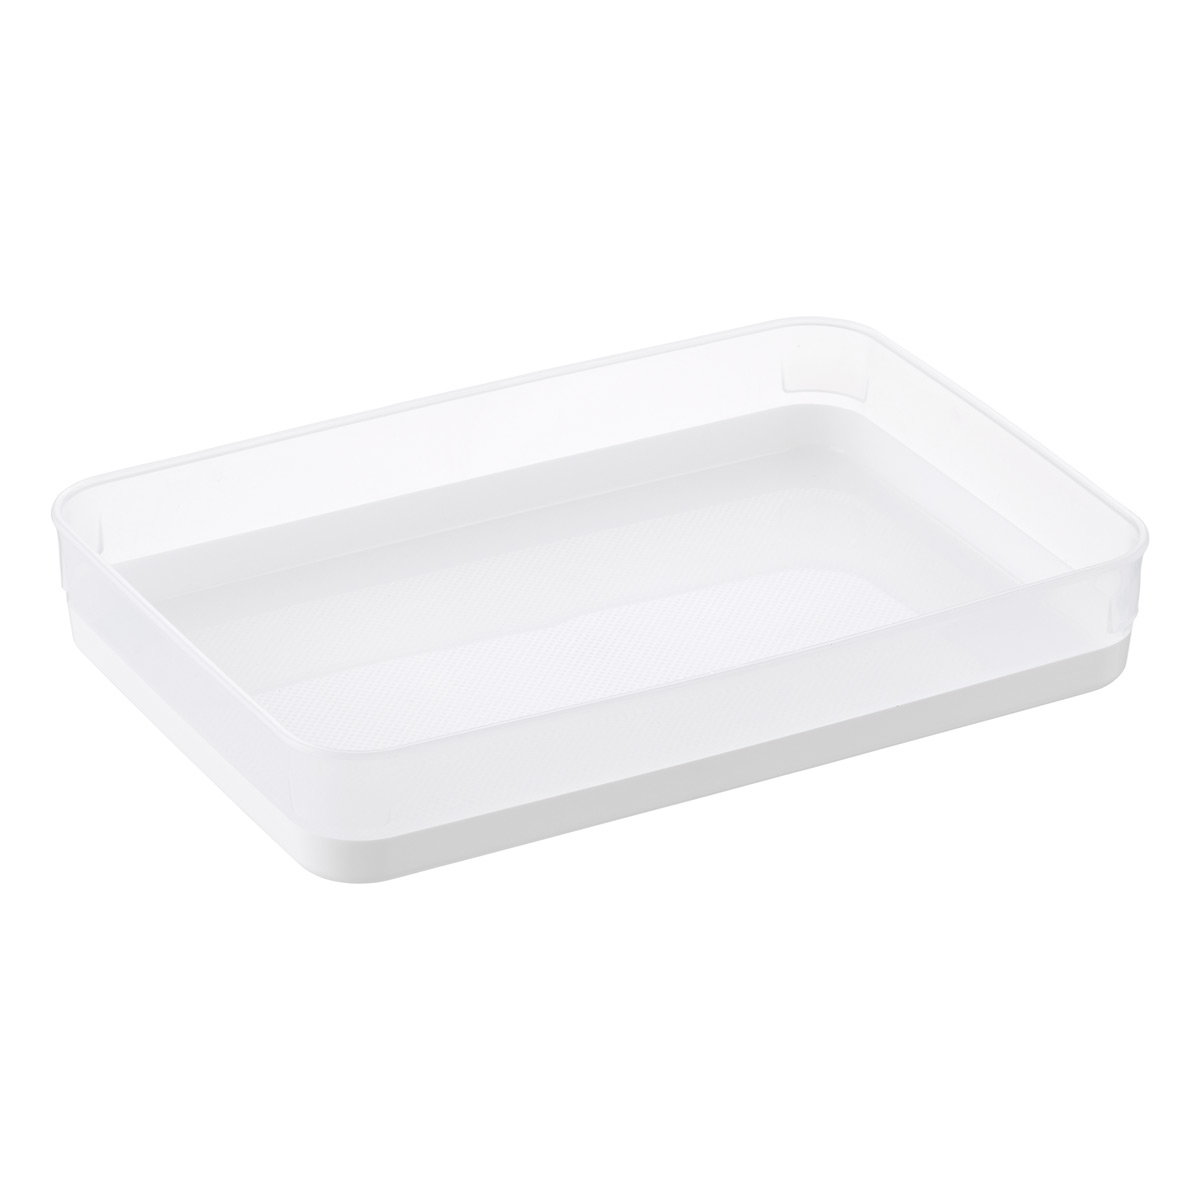 Organizer Trays | The Container Store